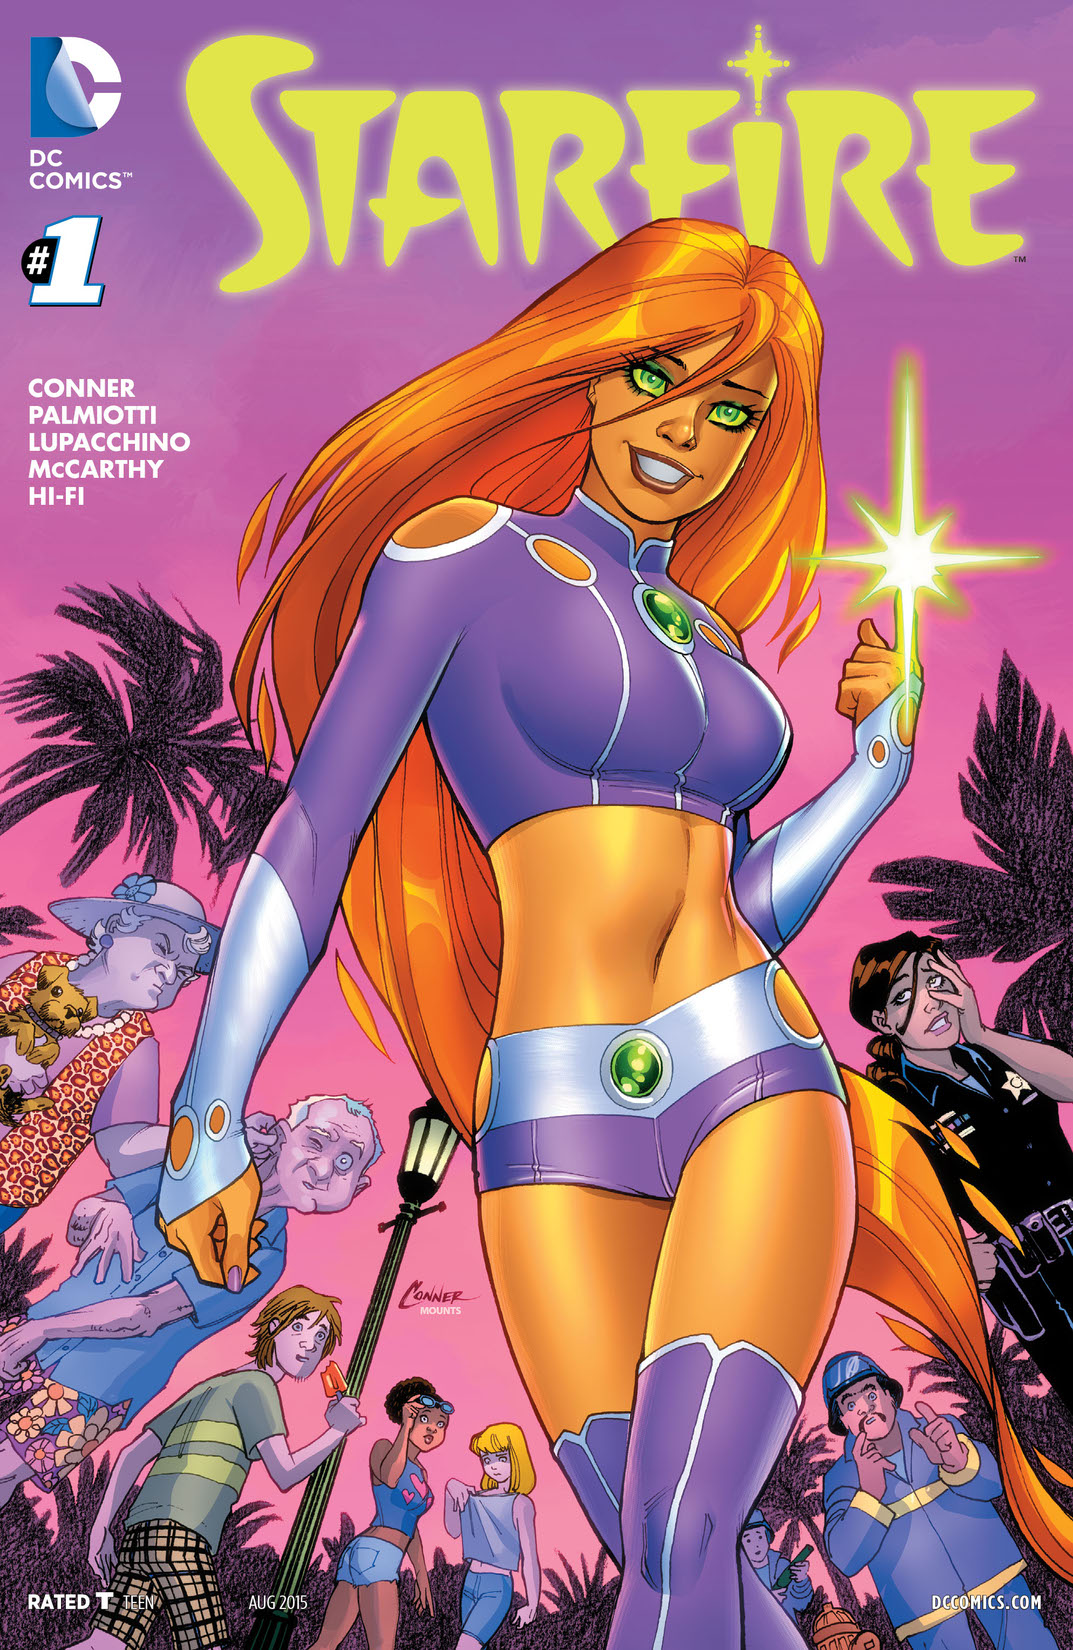 Starfire #1 preview images